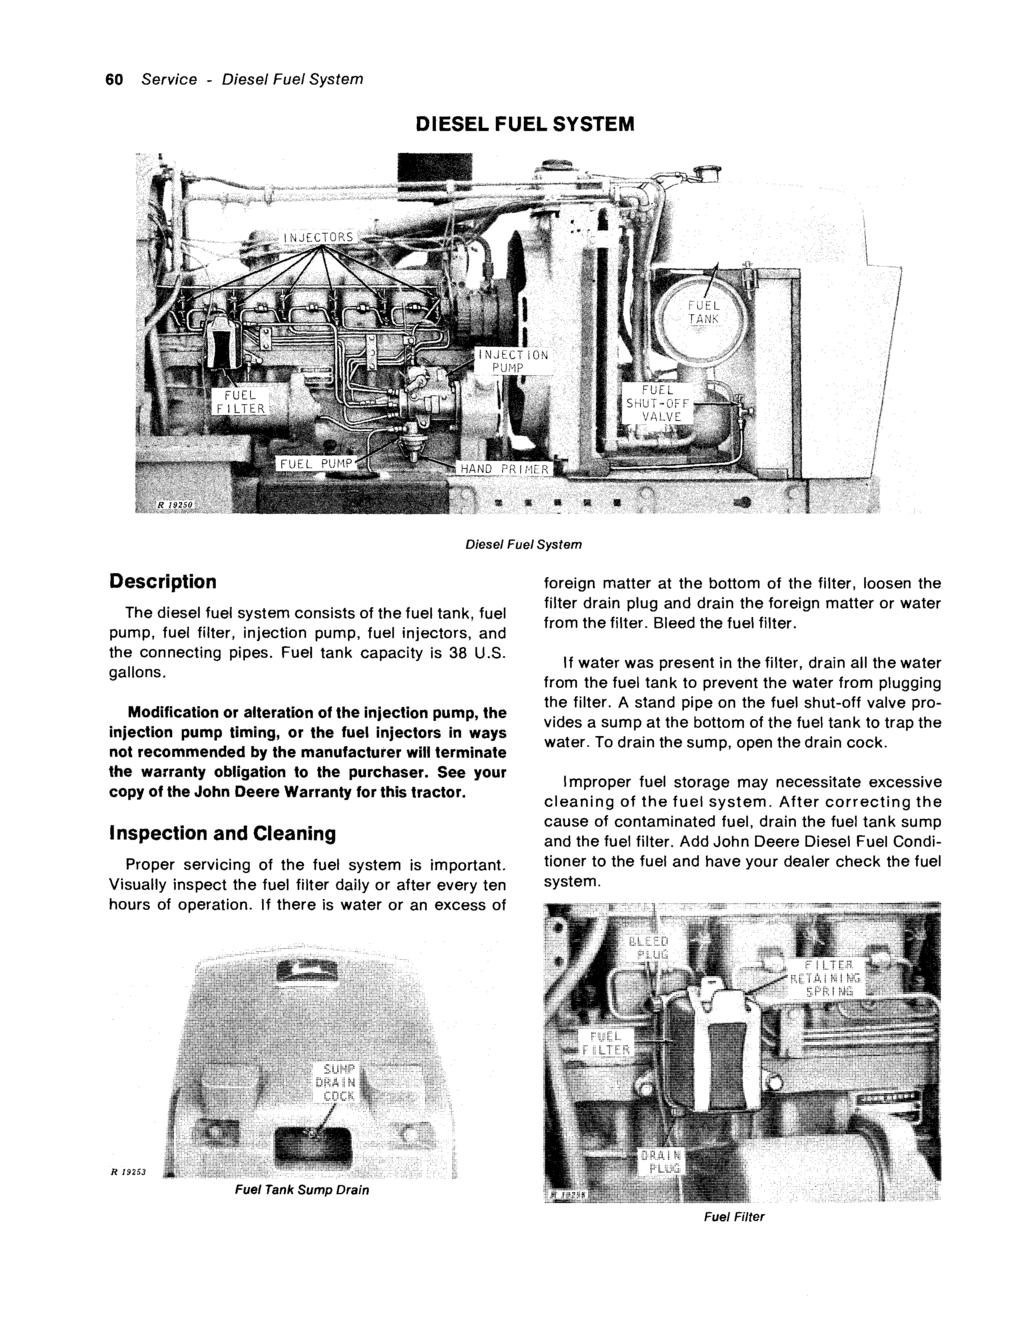 60 Service - Diesel Fuel System DIESEL FUEL SYSTEM Diesel Fuel System Description The diesel fuel system consists of the fuel tank, fuel pump, fuel filter, injection pump, fuel injectors, and the